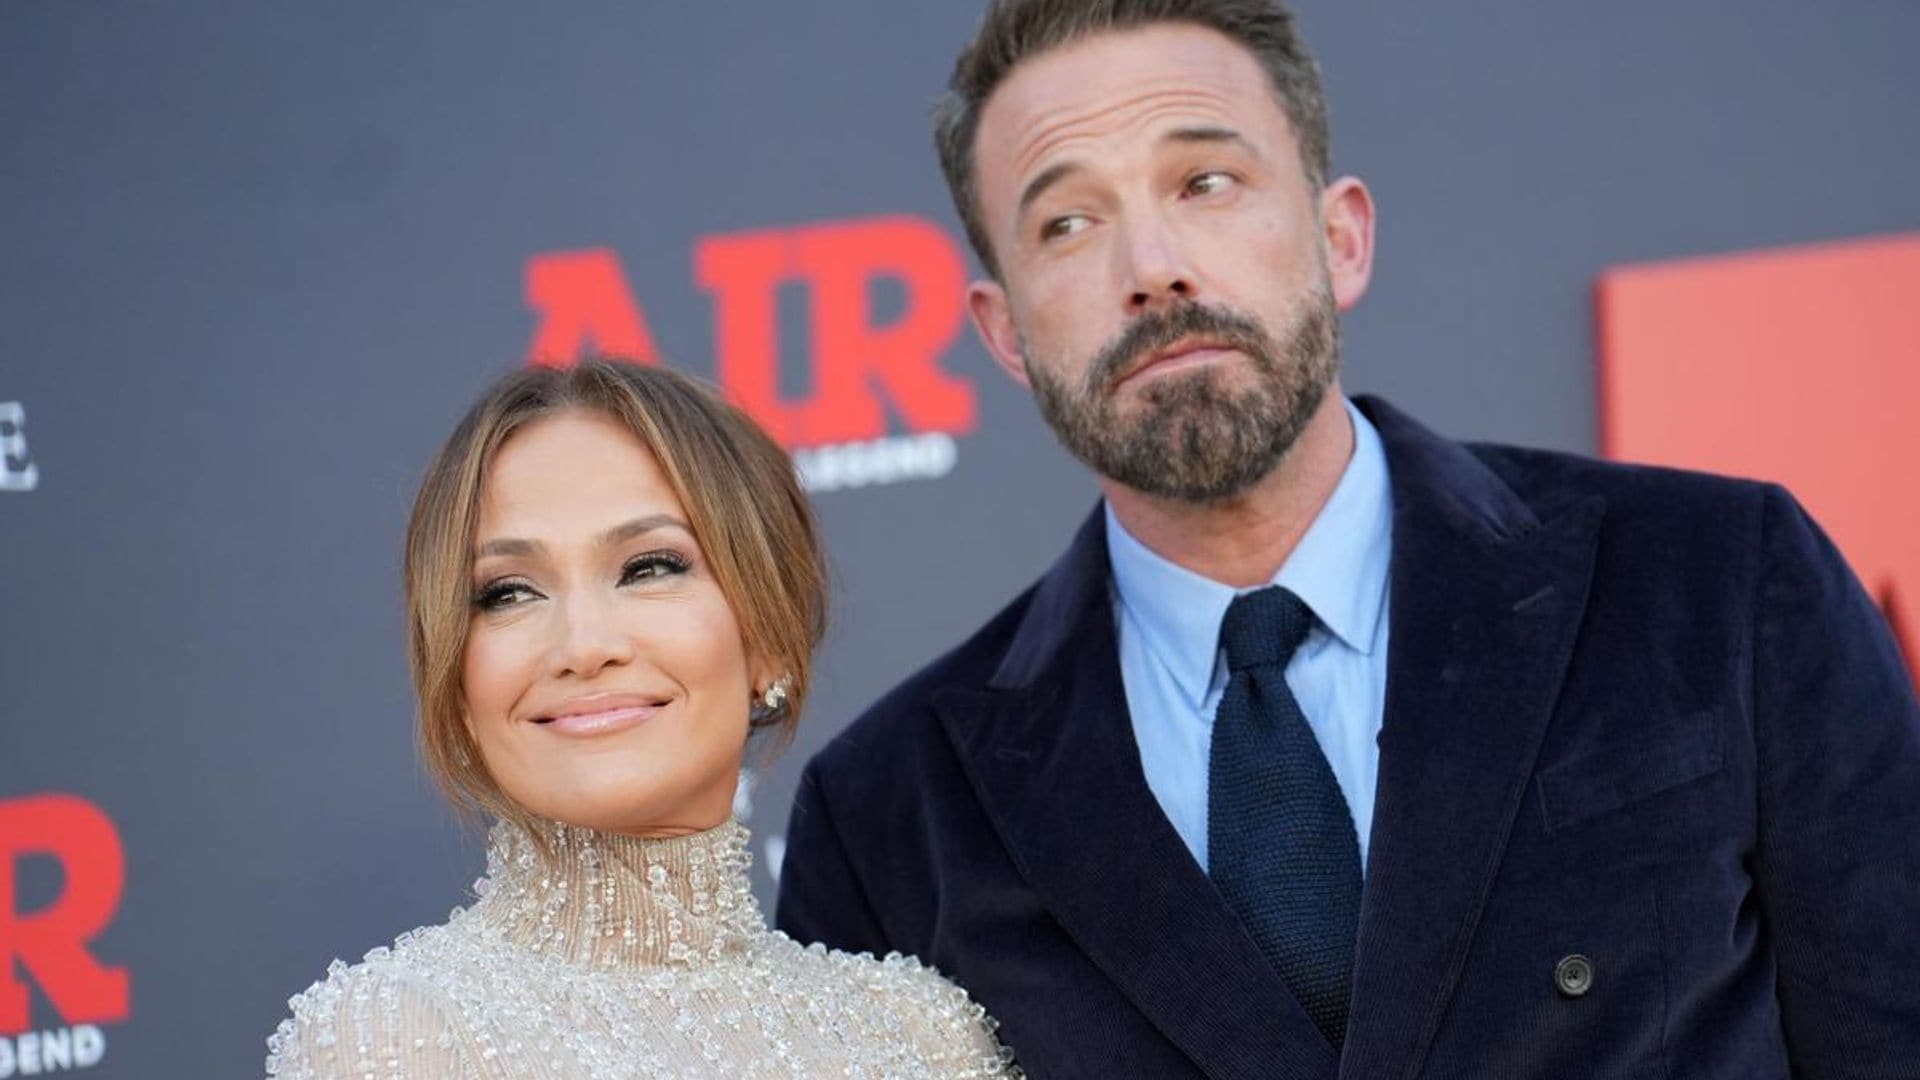 Why Jennifer Lopez wanted Ben Affleck to watch her new film ‘The Mother’ first